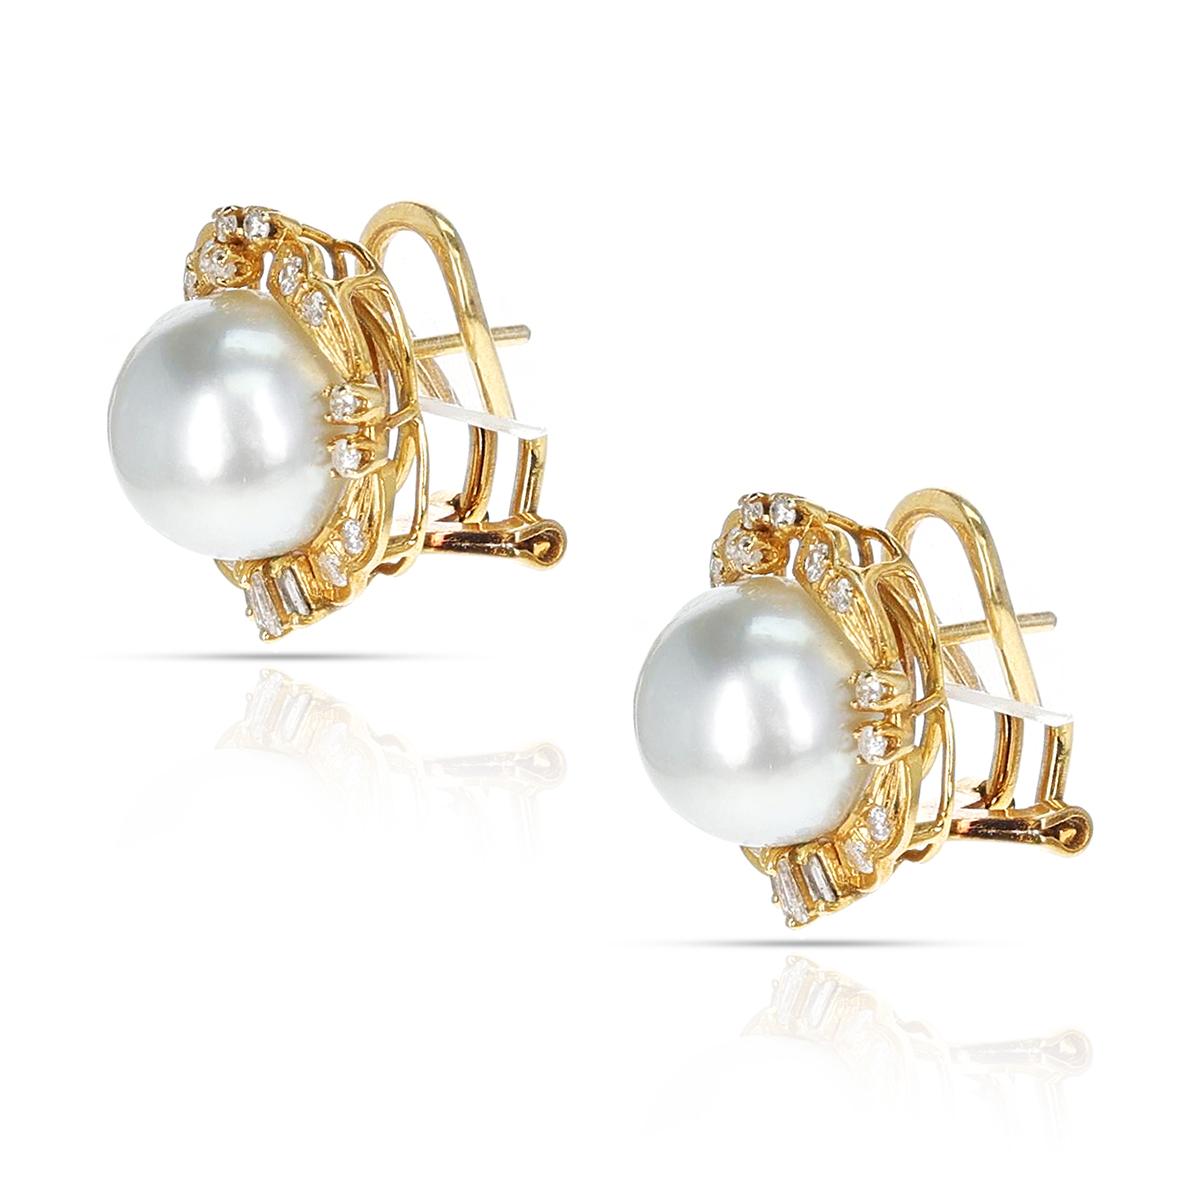 A beautiful and elegant pair of south sea cultured pearl (11.5MM) earrings, with a total of 30 round diamonds and 6 tapered baguette diamonds. Pierced clip back earrings, Length: .75” Stamped 14K.